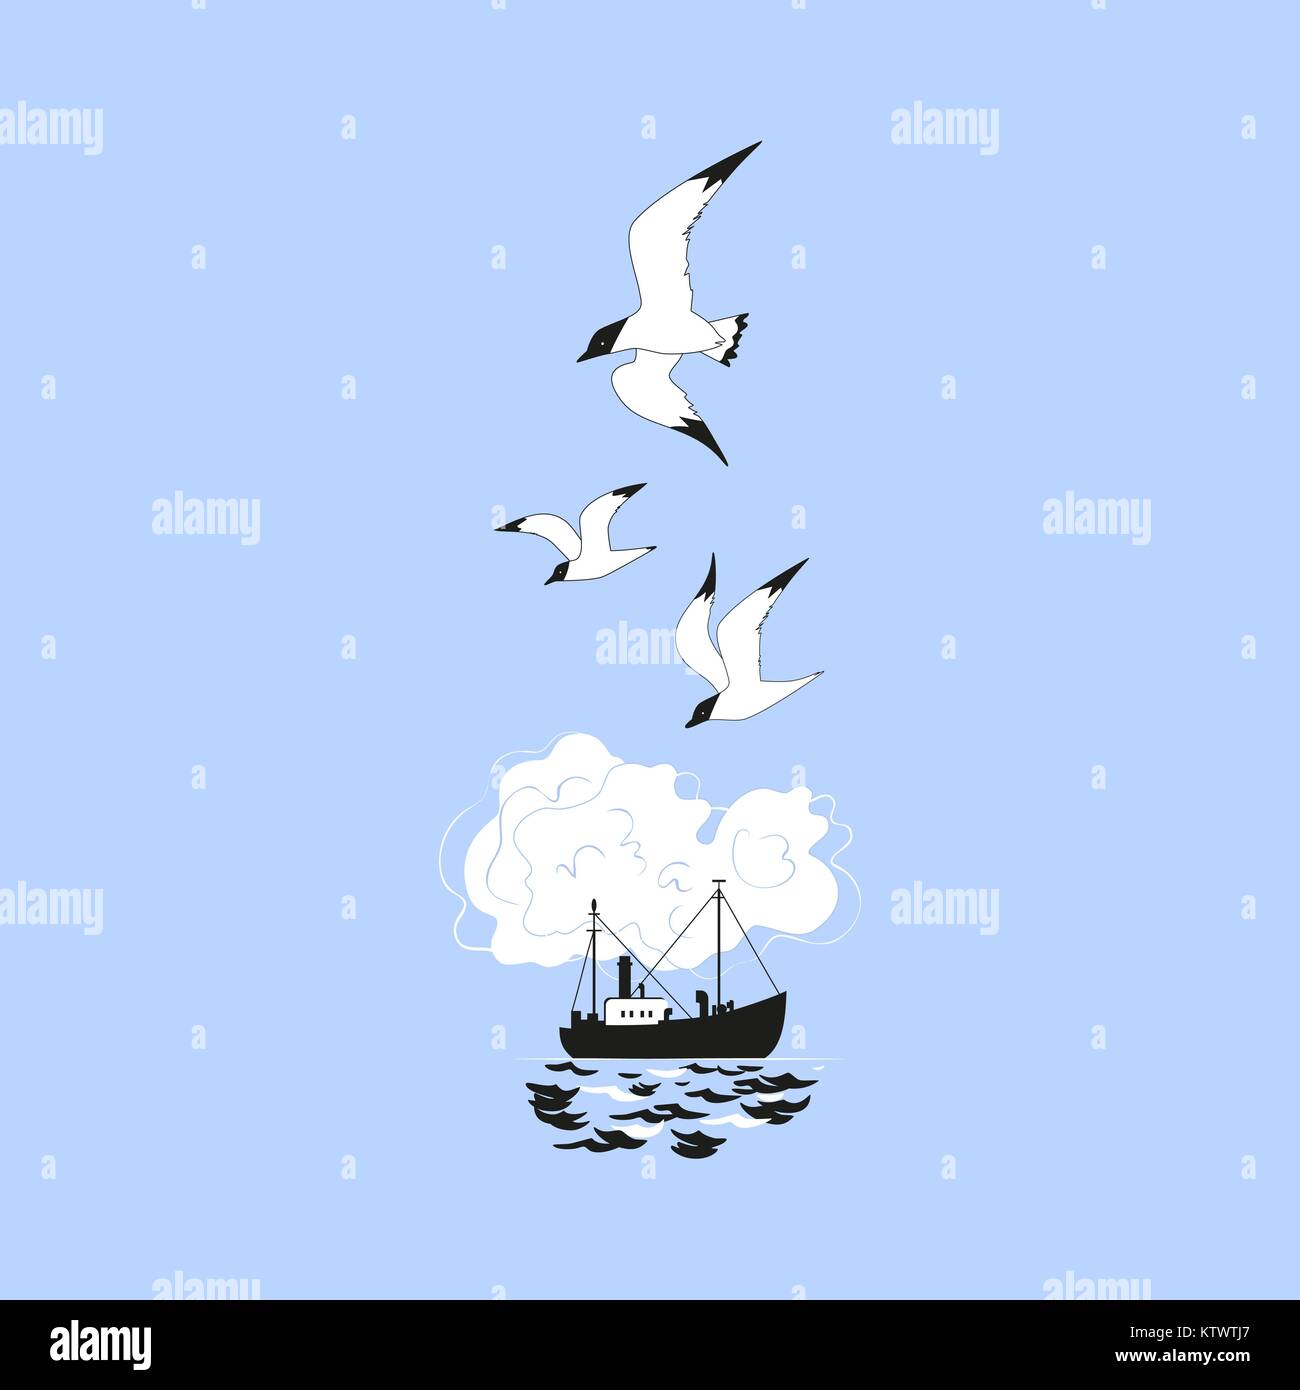 Commercial fishing trawler icon Stock Vector